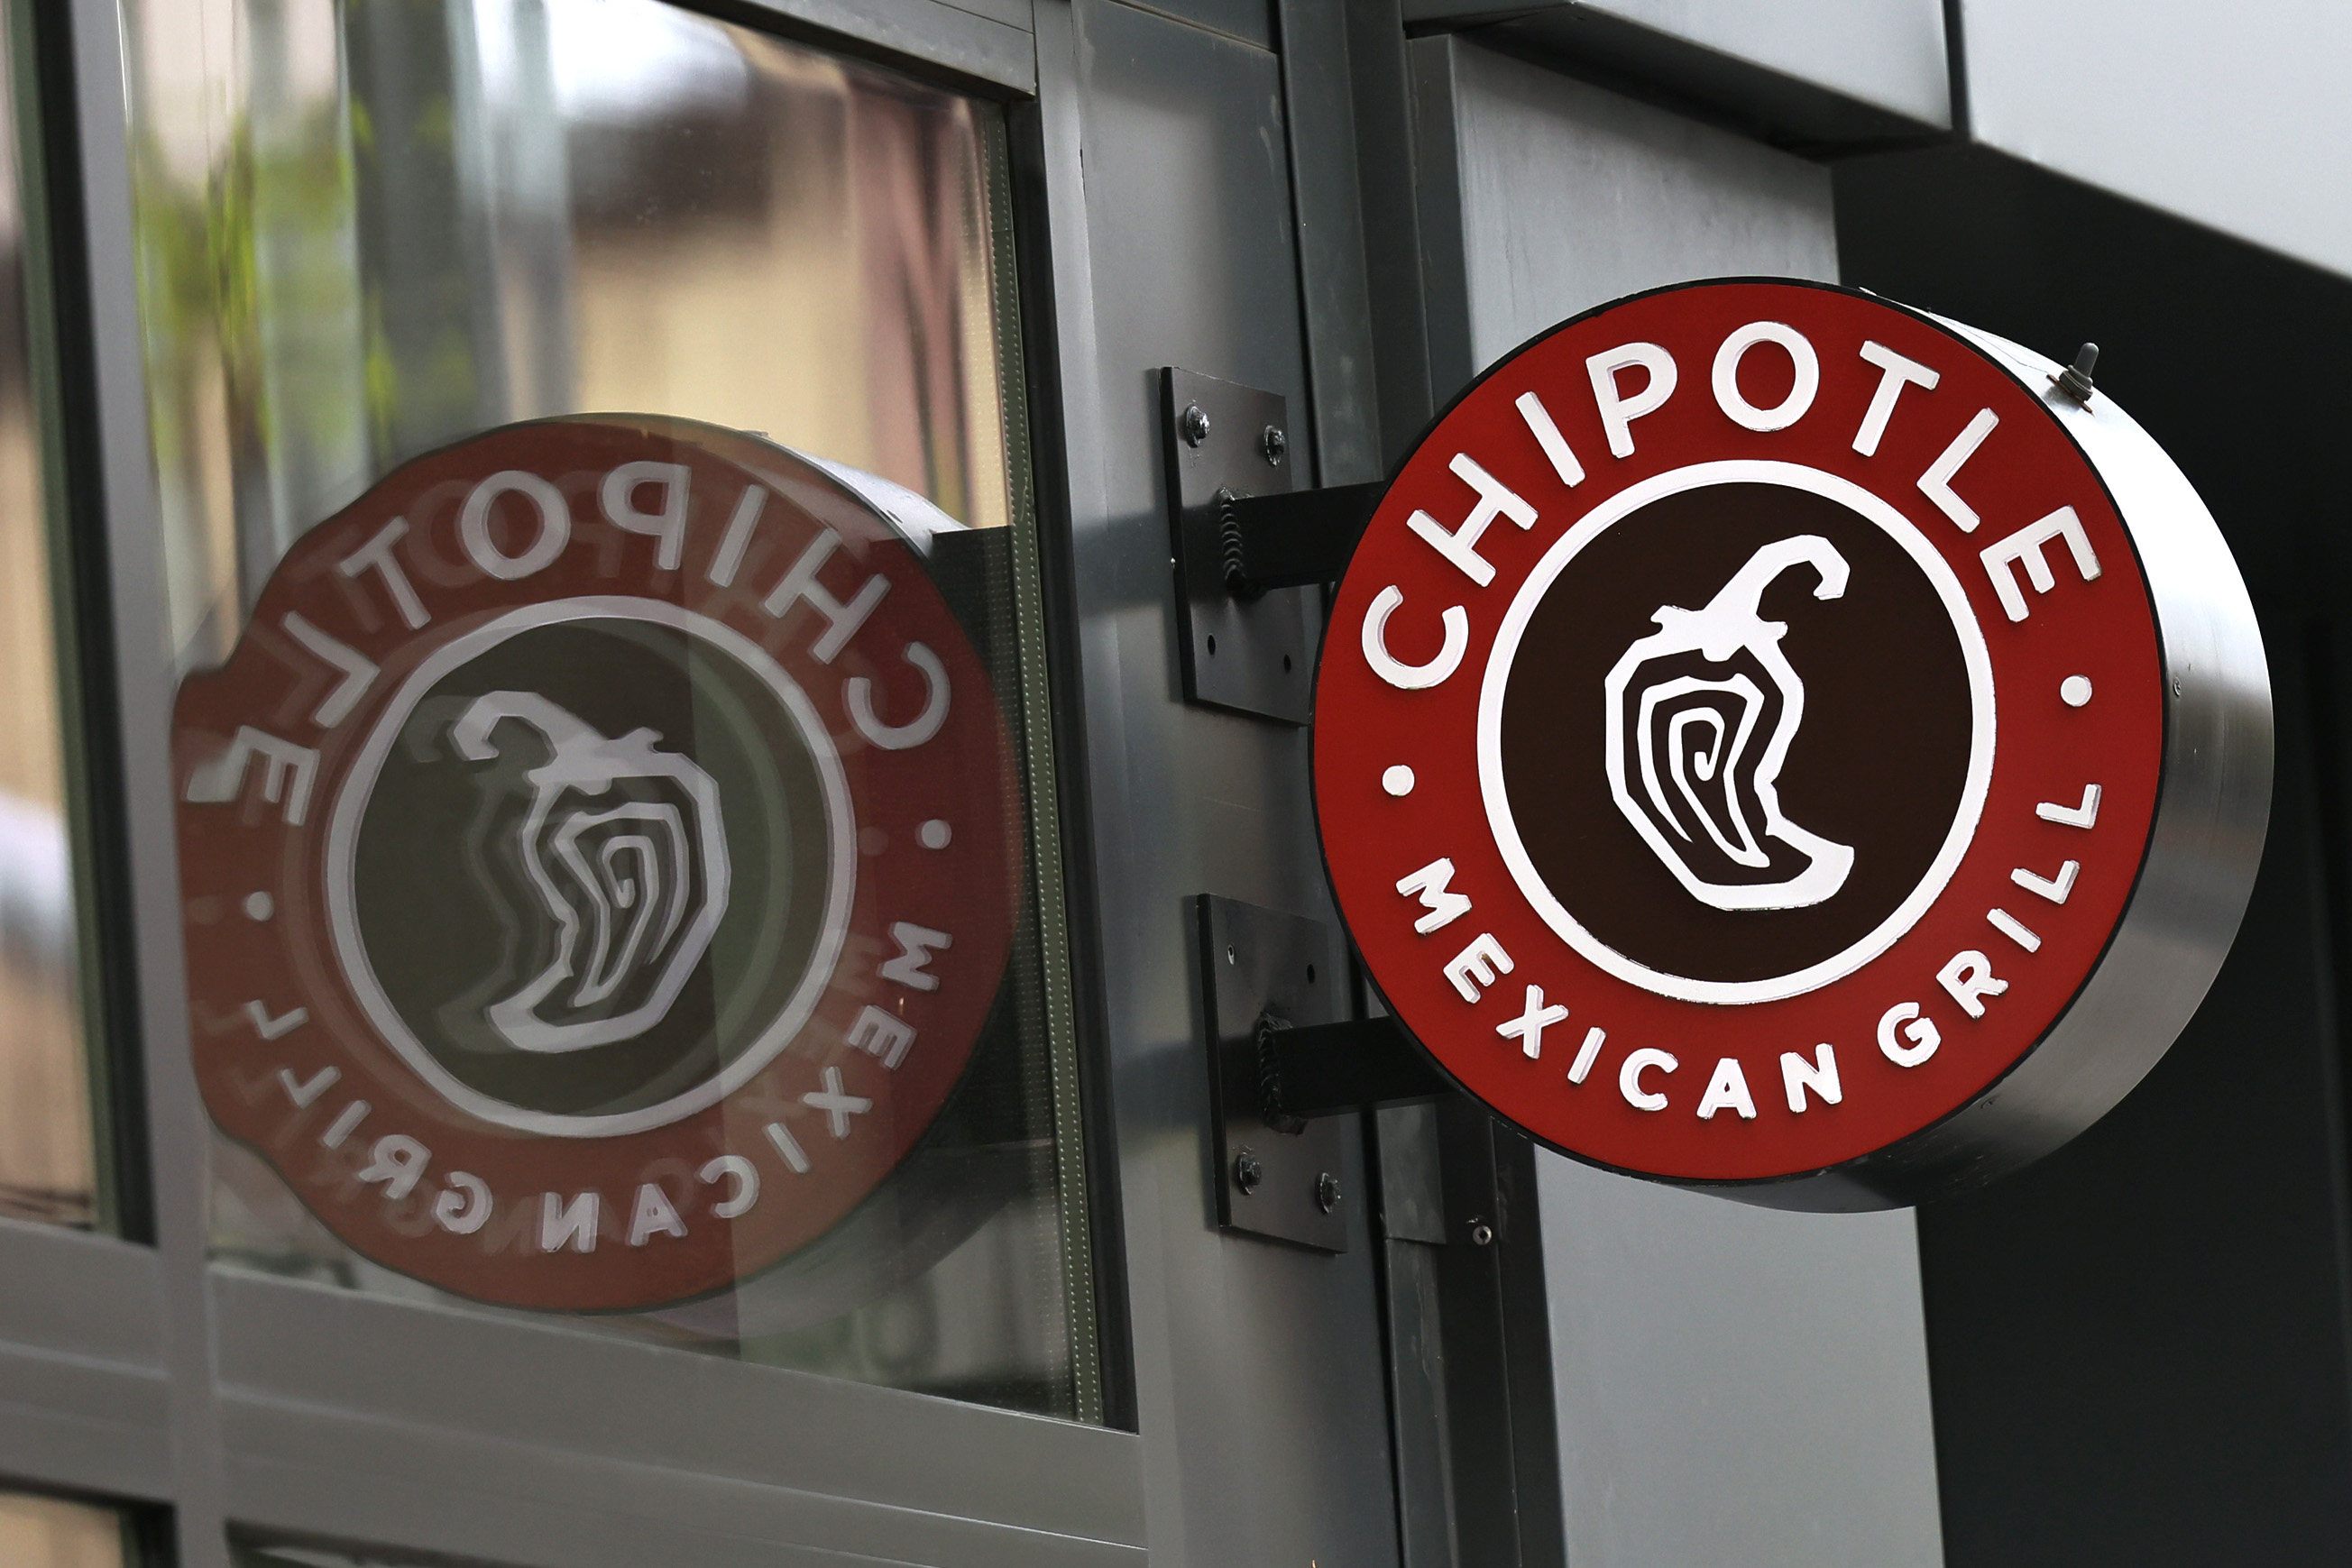 Chipotle has no responded for comment but posted a video on TikTok comedically addressing the situation.